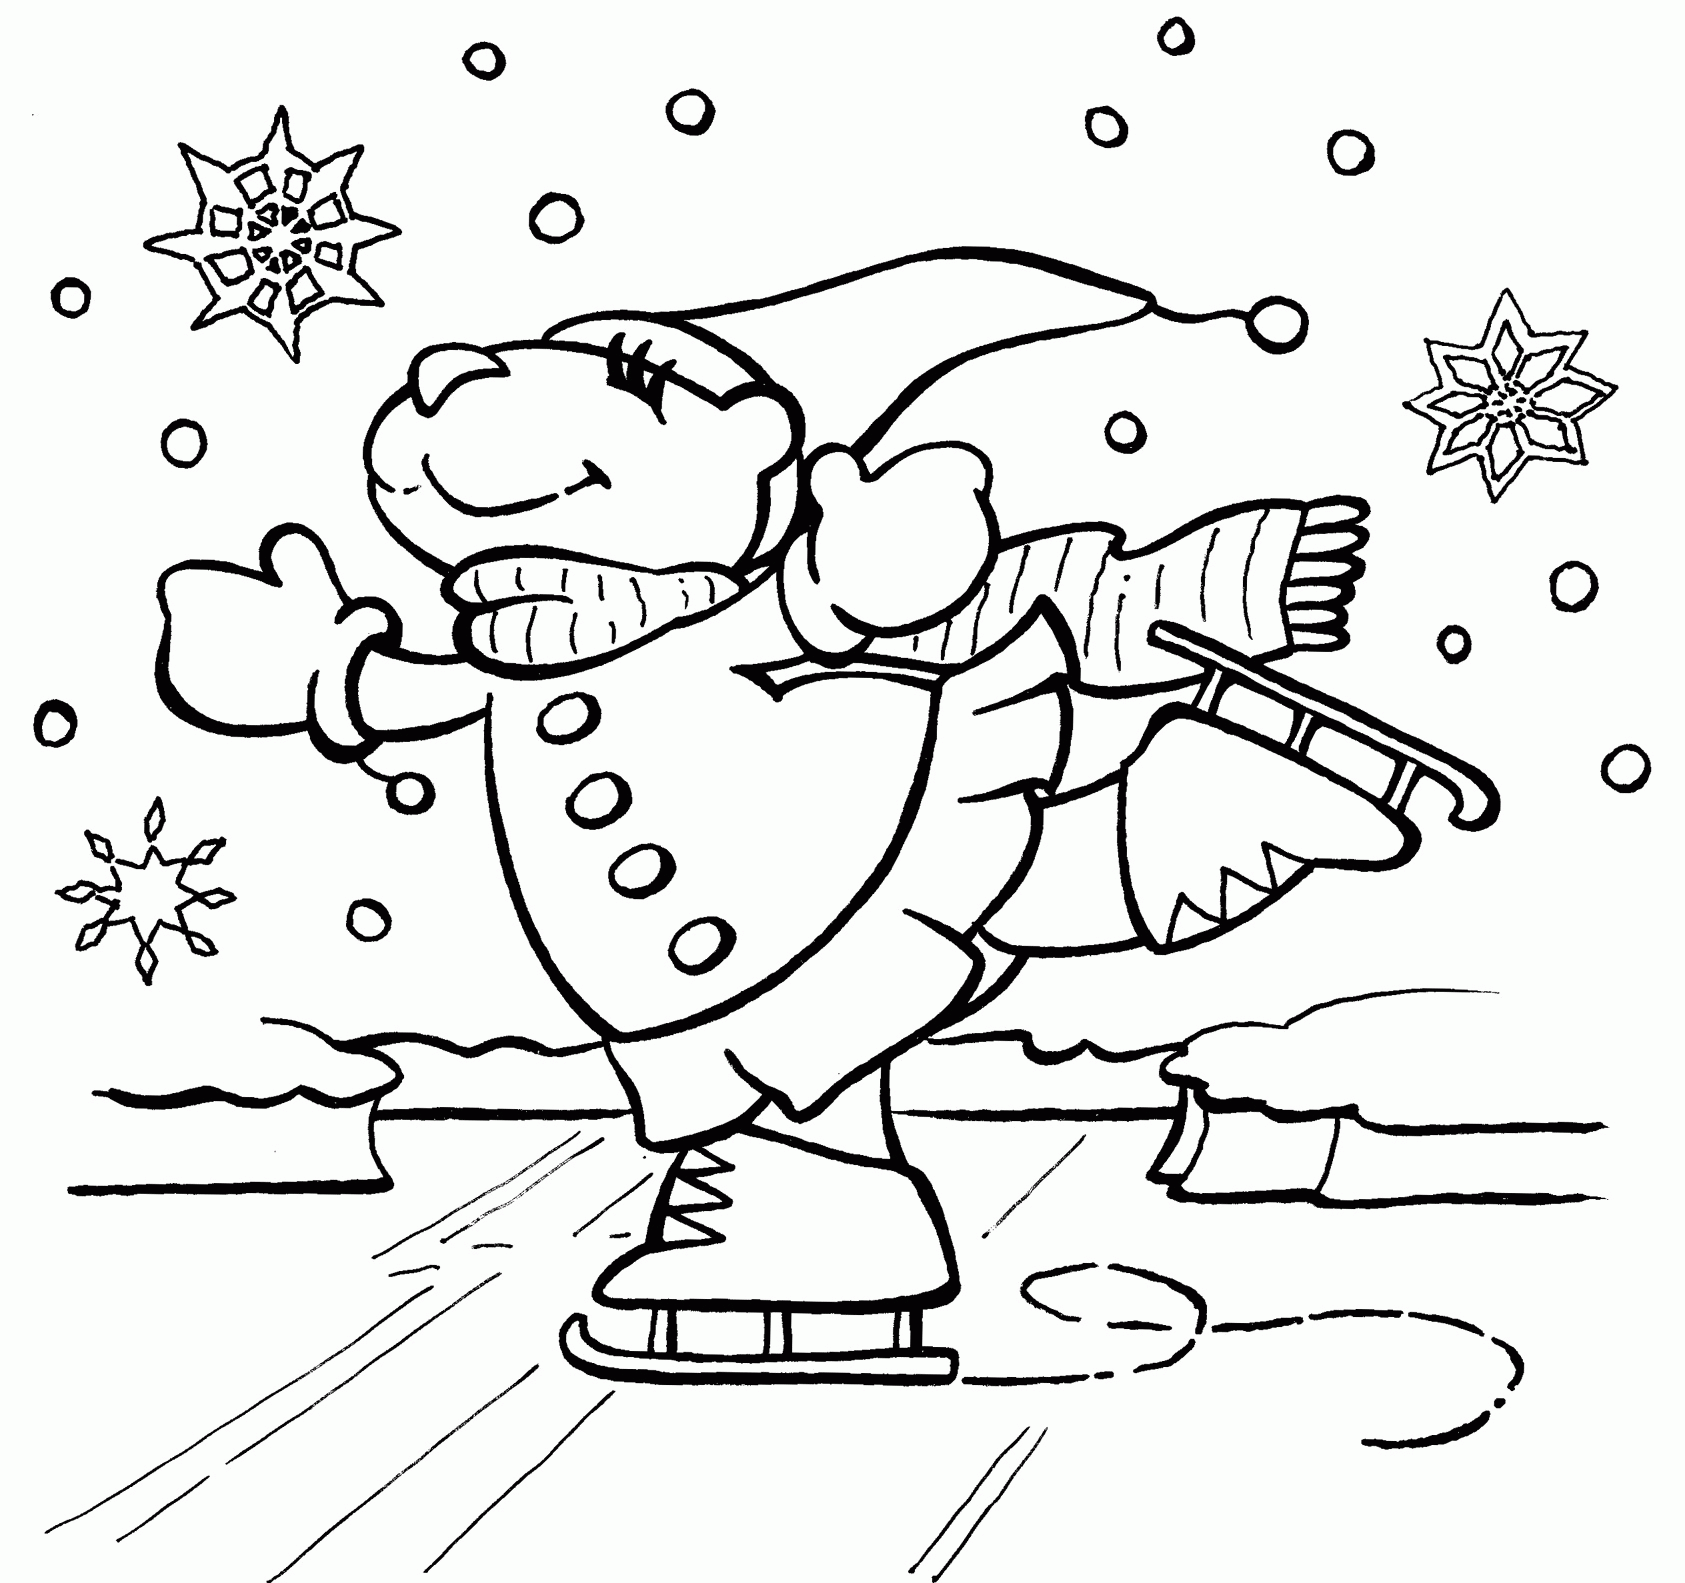 Printable Winter Scene Coloring Pages Coloring Home